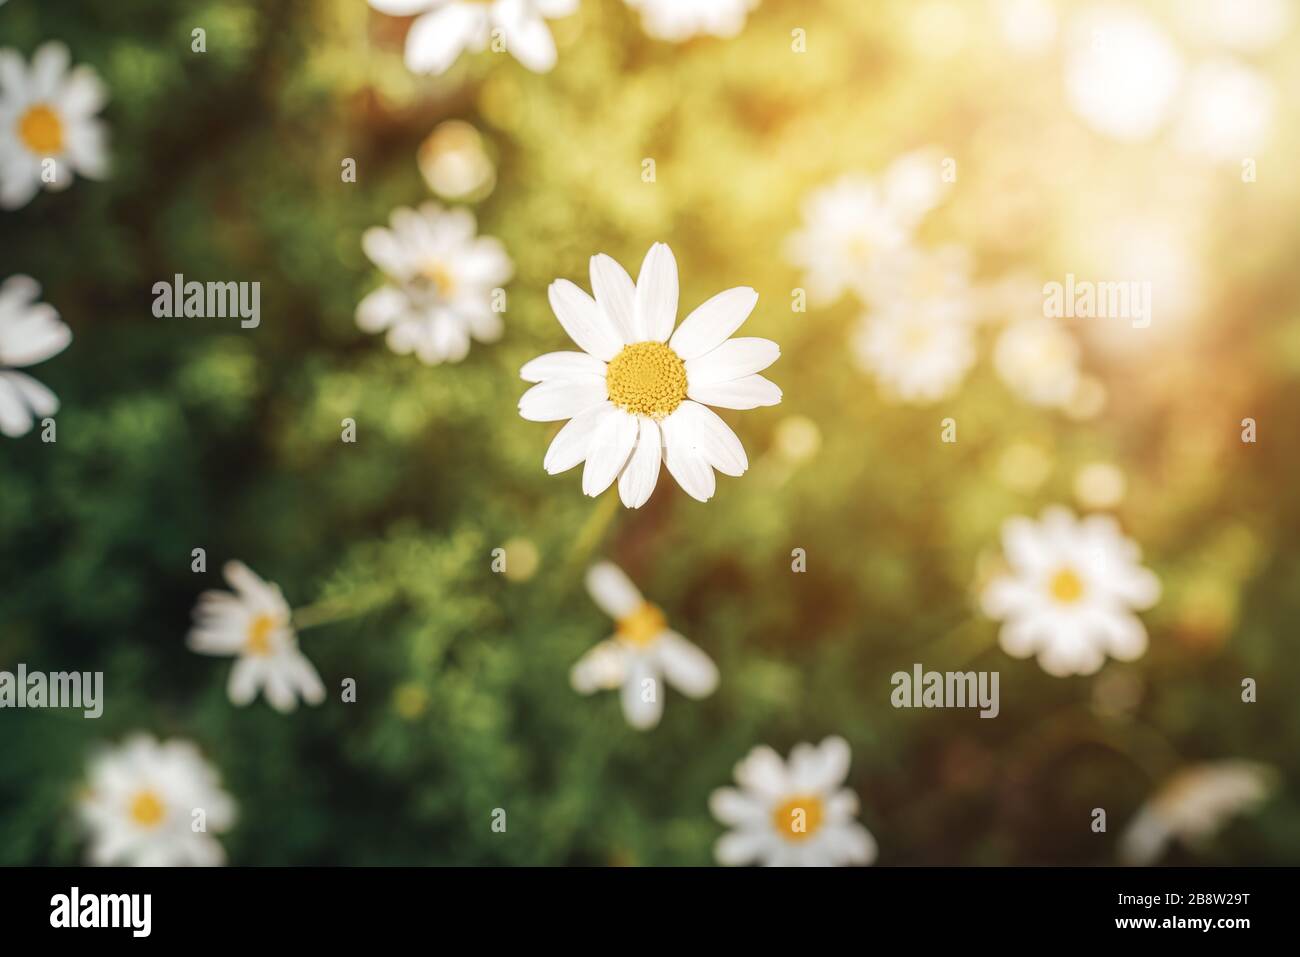 Daisy flower in the grass green shallow depth of field. Beautiful daisy flowers in nature. Spring Concept Stock Photo